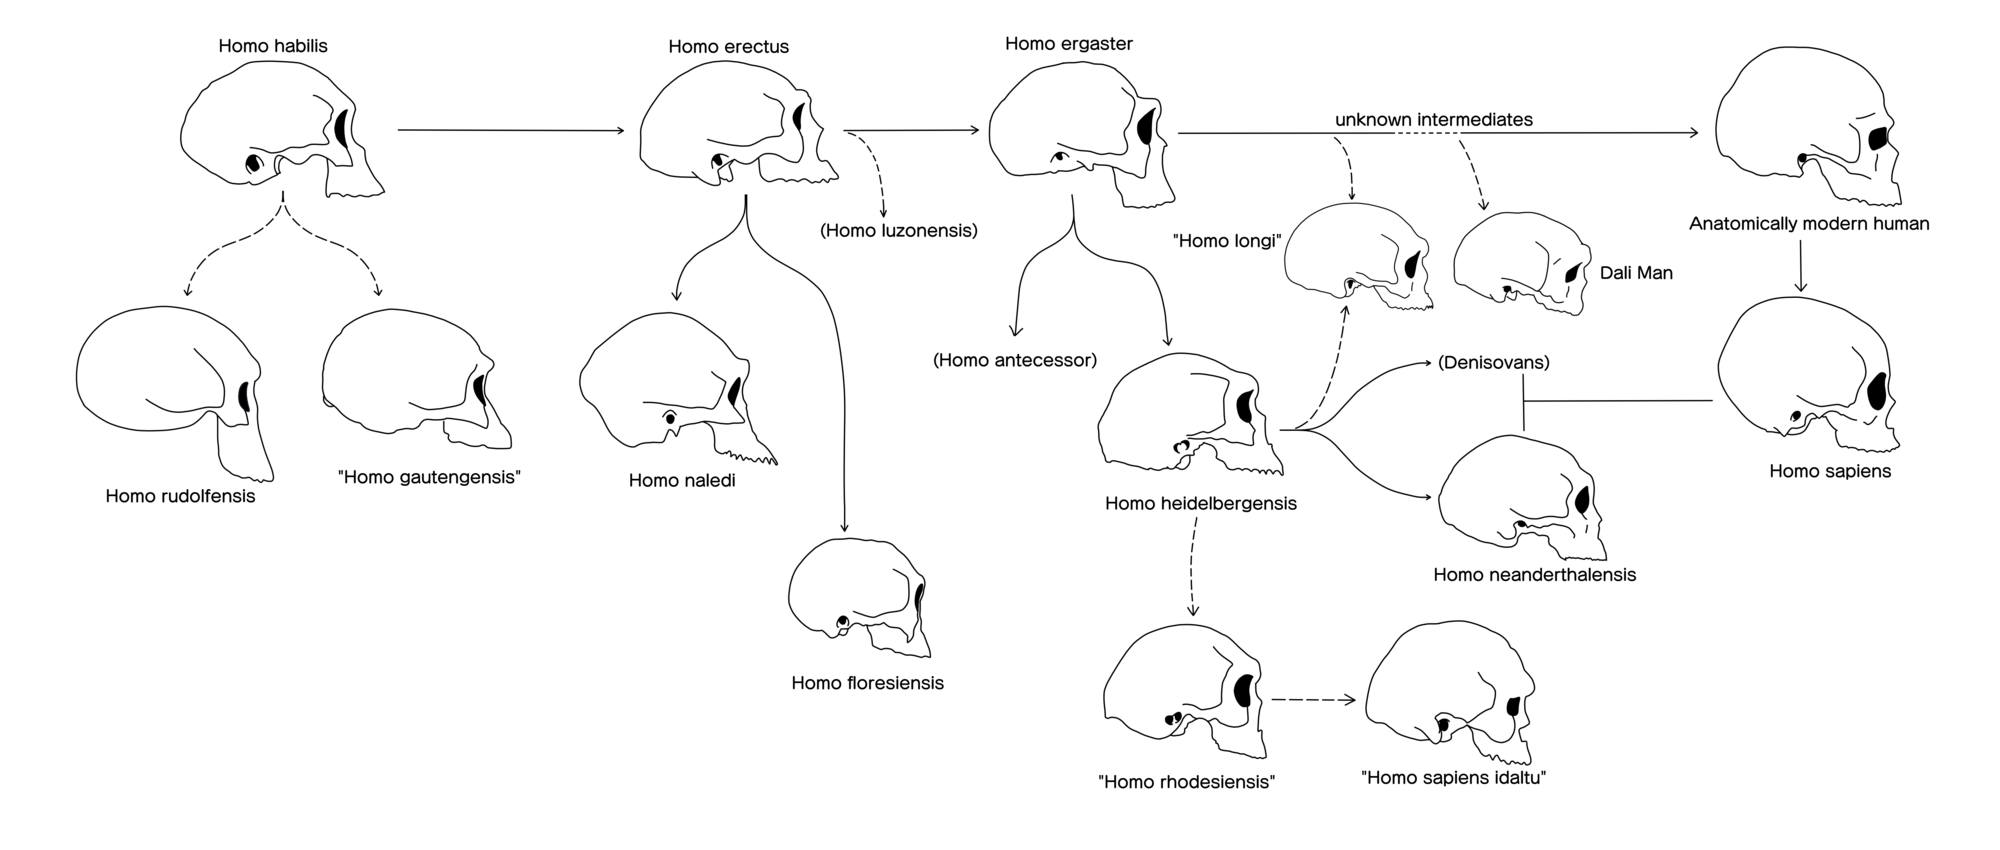 Evolution of the shape, size, and contours of the human (Homo) skull.[57][58][c][62][d][64][65][66][67][68][69][70][71]